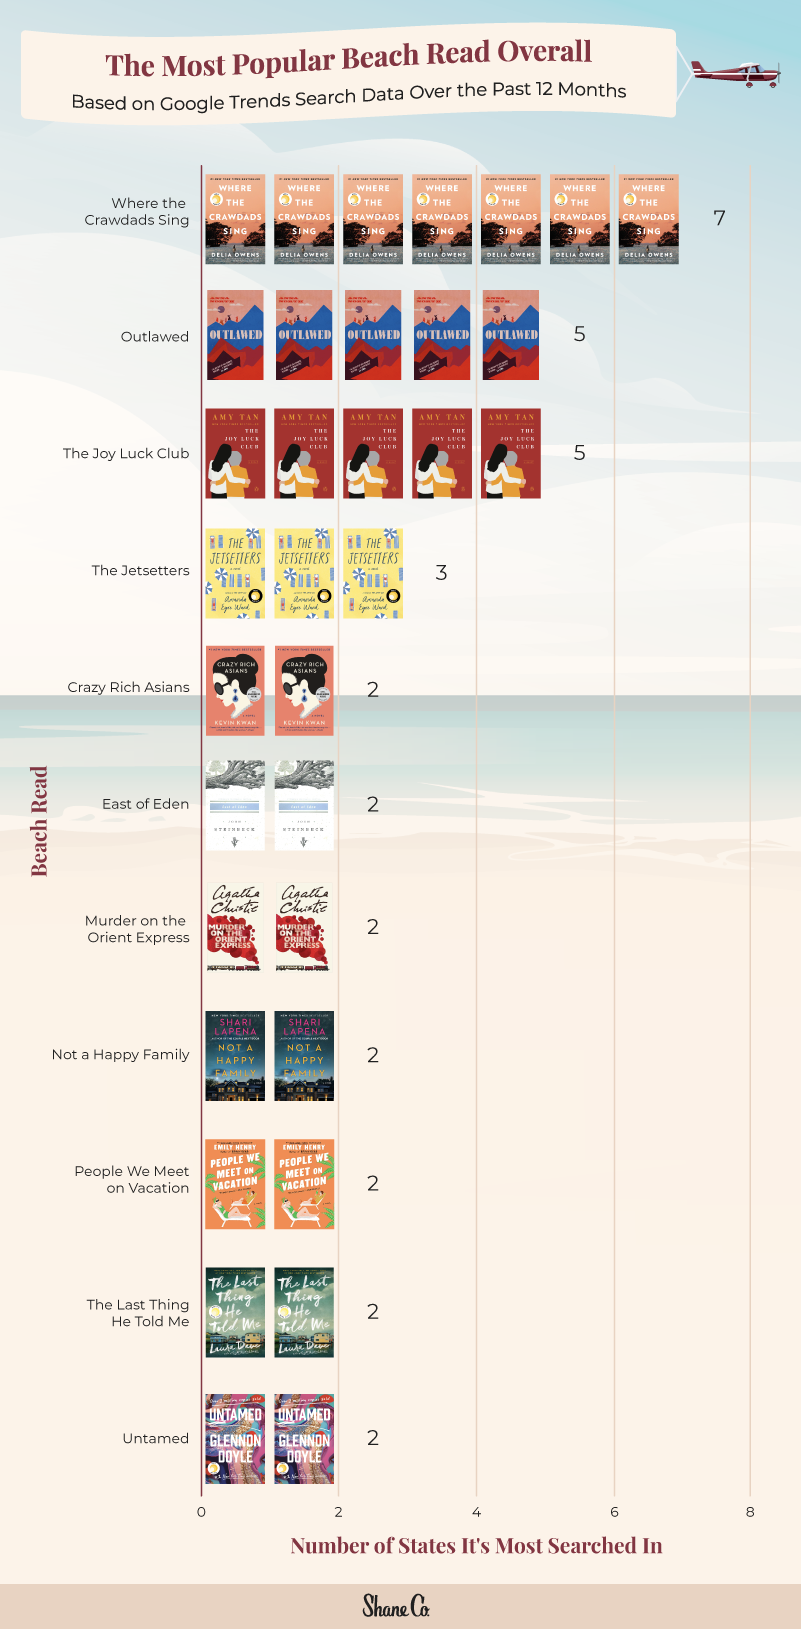 A bar chart showing the most popular beach reads in the U.S. overall